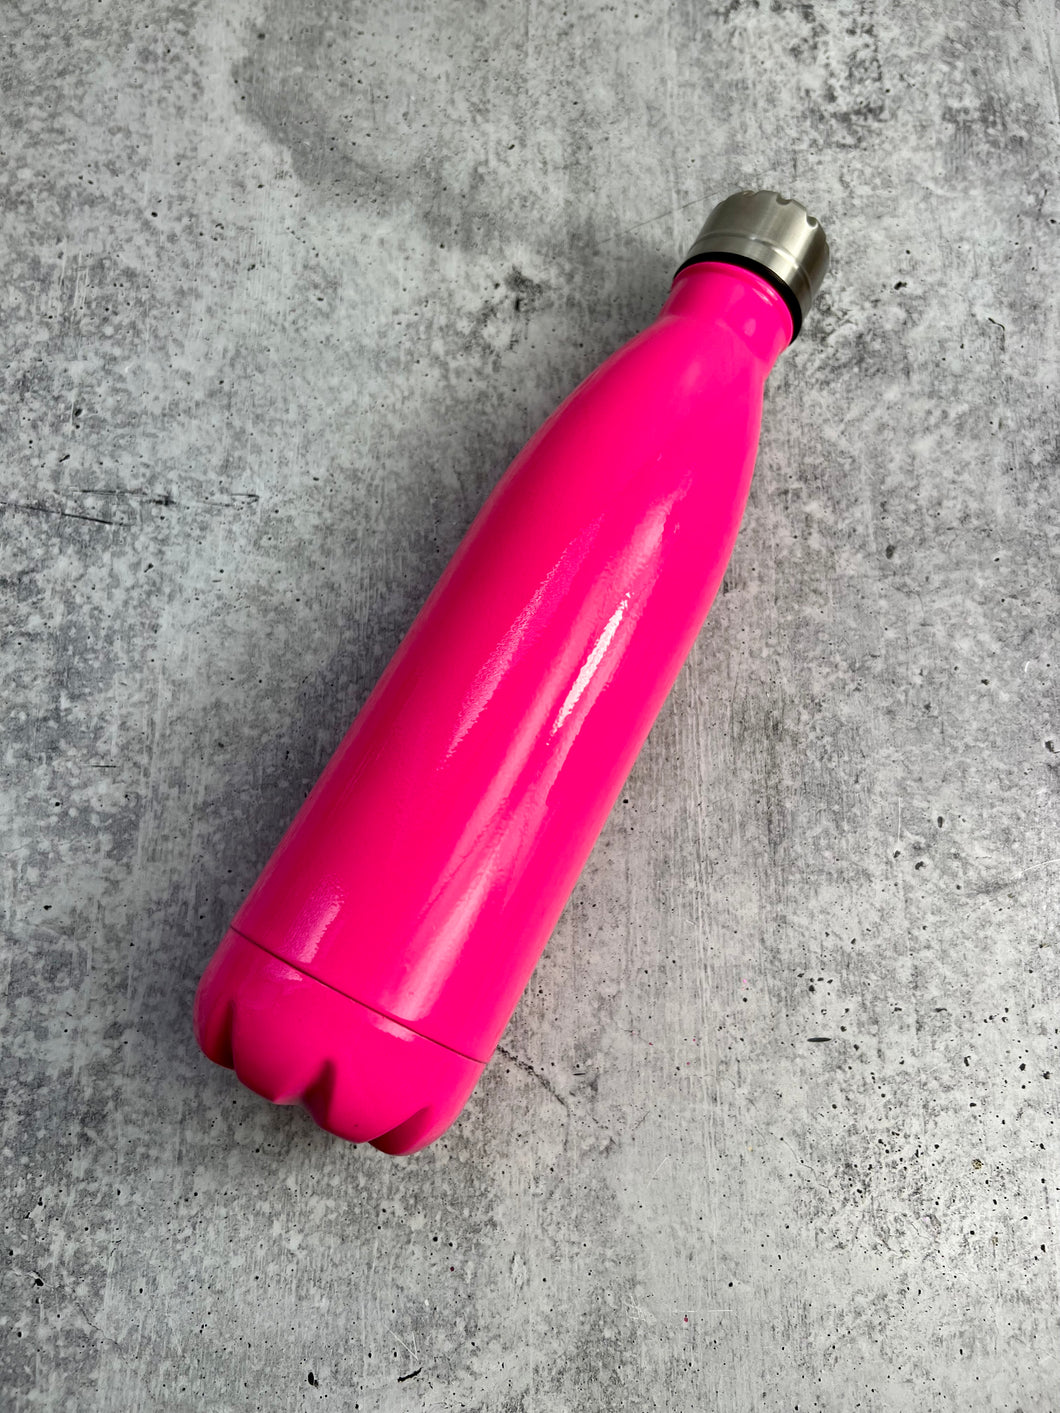 CLEARANCE - Pink Powder Coated Stainless Steel water bottle, 17 oz